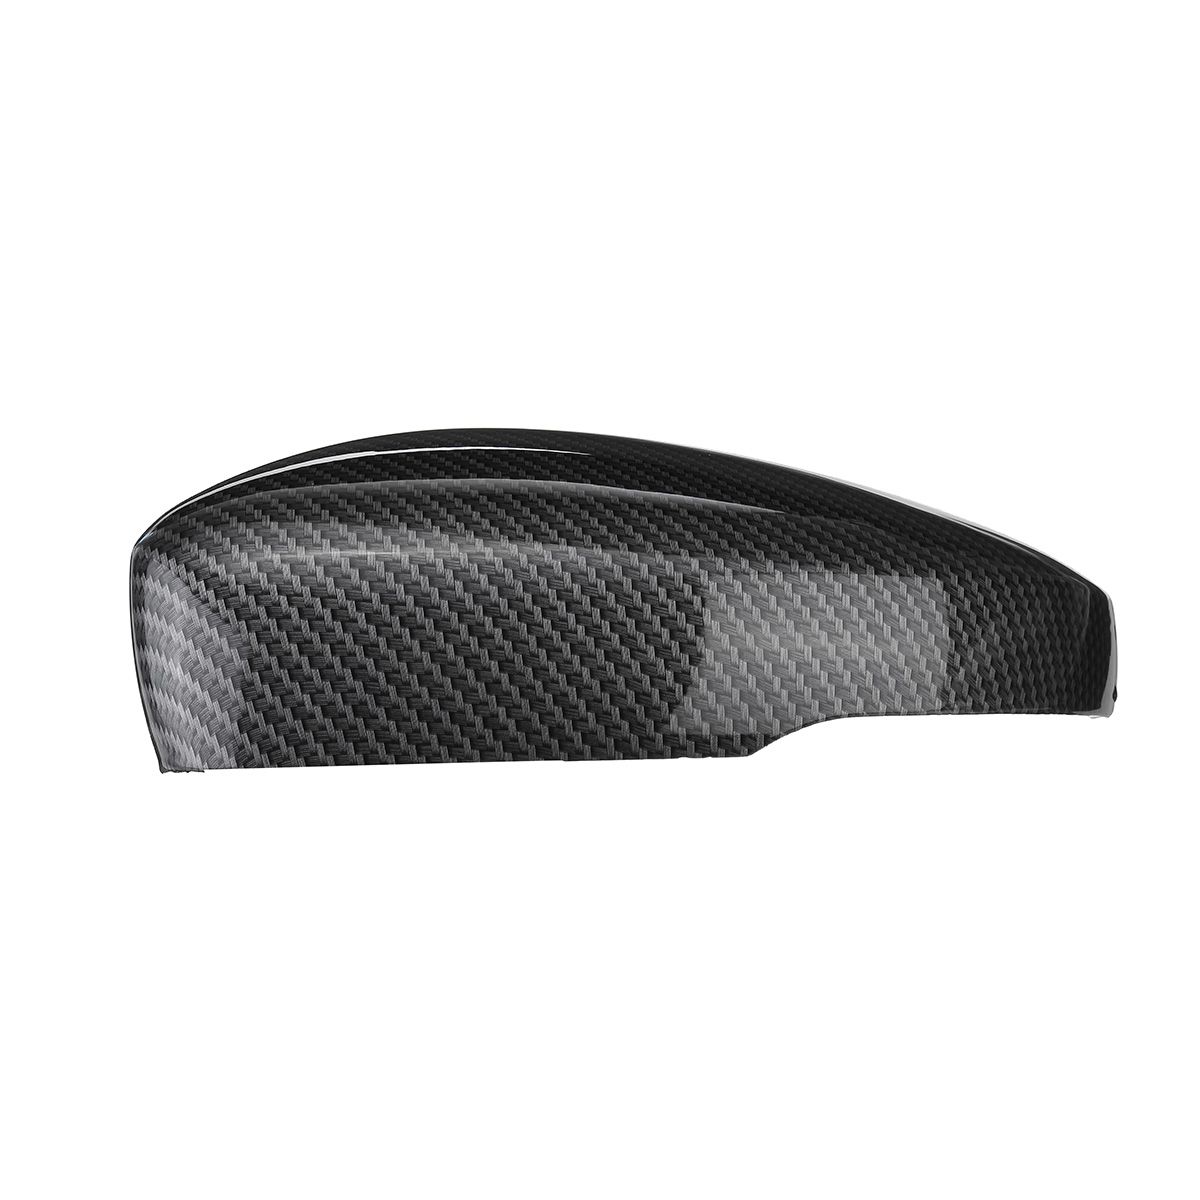 2Pcs-Carbon-Fiber-Door-Wing-Caps-Rearview-Mirror-Covers-For-VW-Polo-6R-6C-2010-2017-1659386